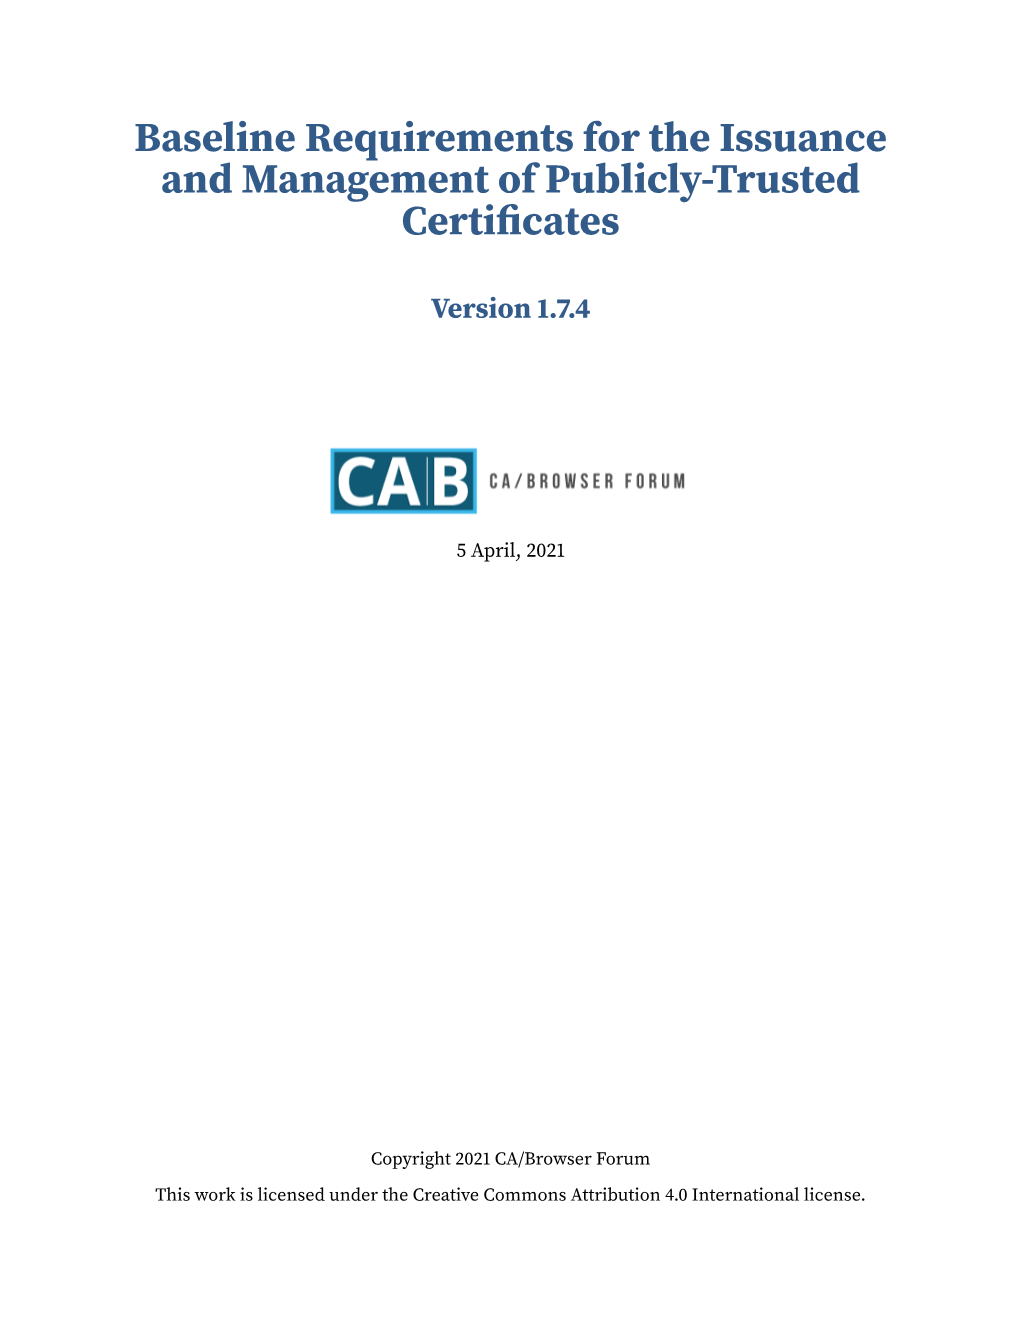 Baseline Requirements for the Issuance and Management of Publicly-Trusted Certificates